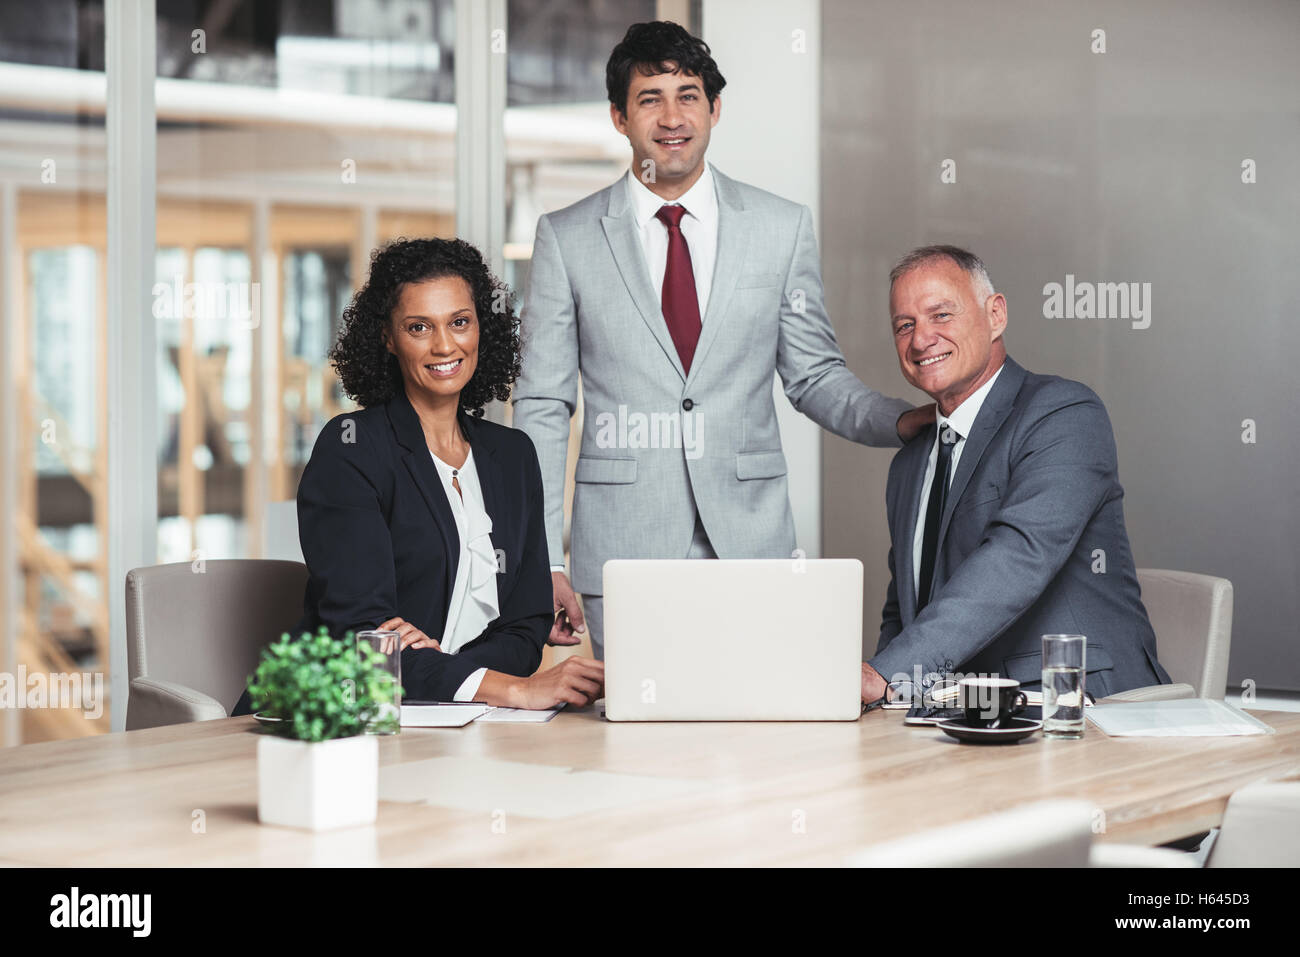 They know business Stock Photo